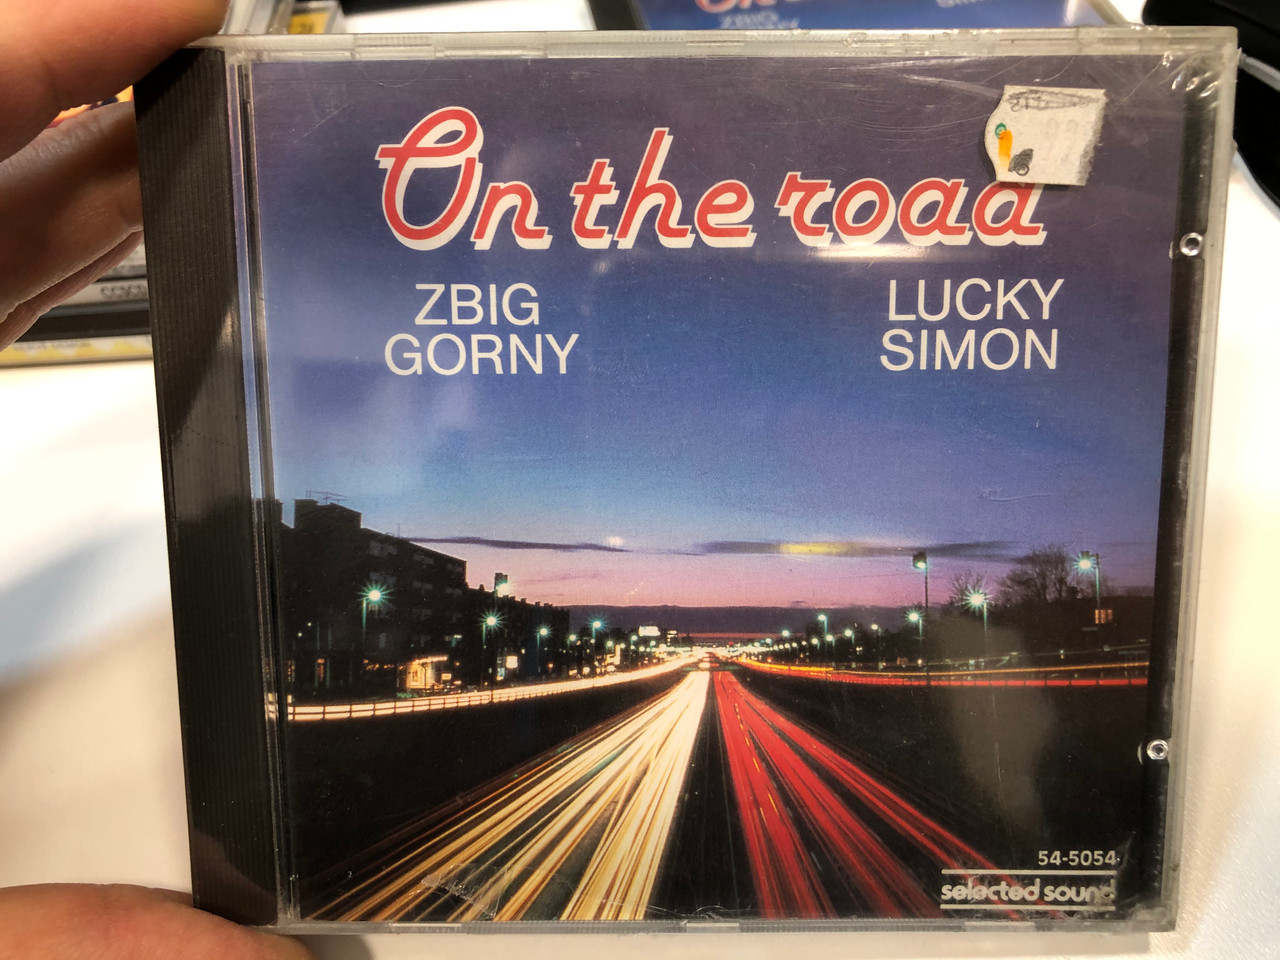 https://cdn10.bigcommerce.com/s-62bdpkt7pb/products/29441/images/175584/On_The_Road_-_Zbig_Gorny_Lucky_Simon_Selected_Sound_Audio_CD_1988_Stereo_54-5054_1__30570.1618816701.1280.1280.JPG?c=2&_ga=2.204831448.95372089.1618847256-1865802195.1618847256